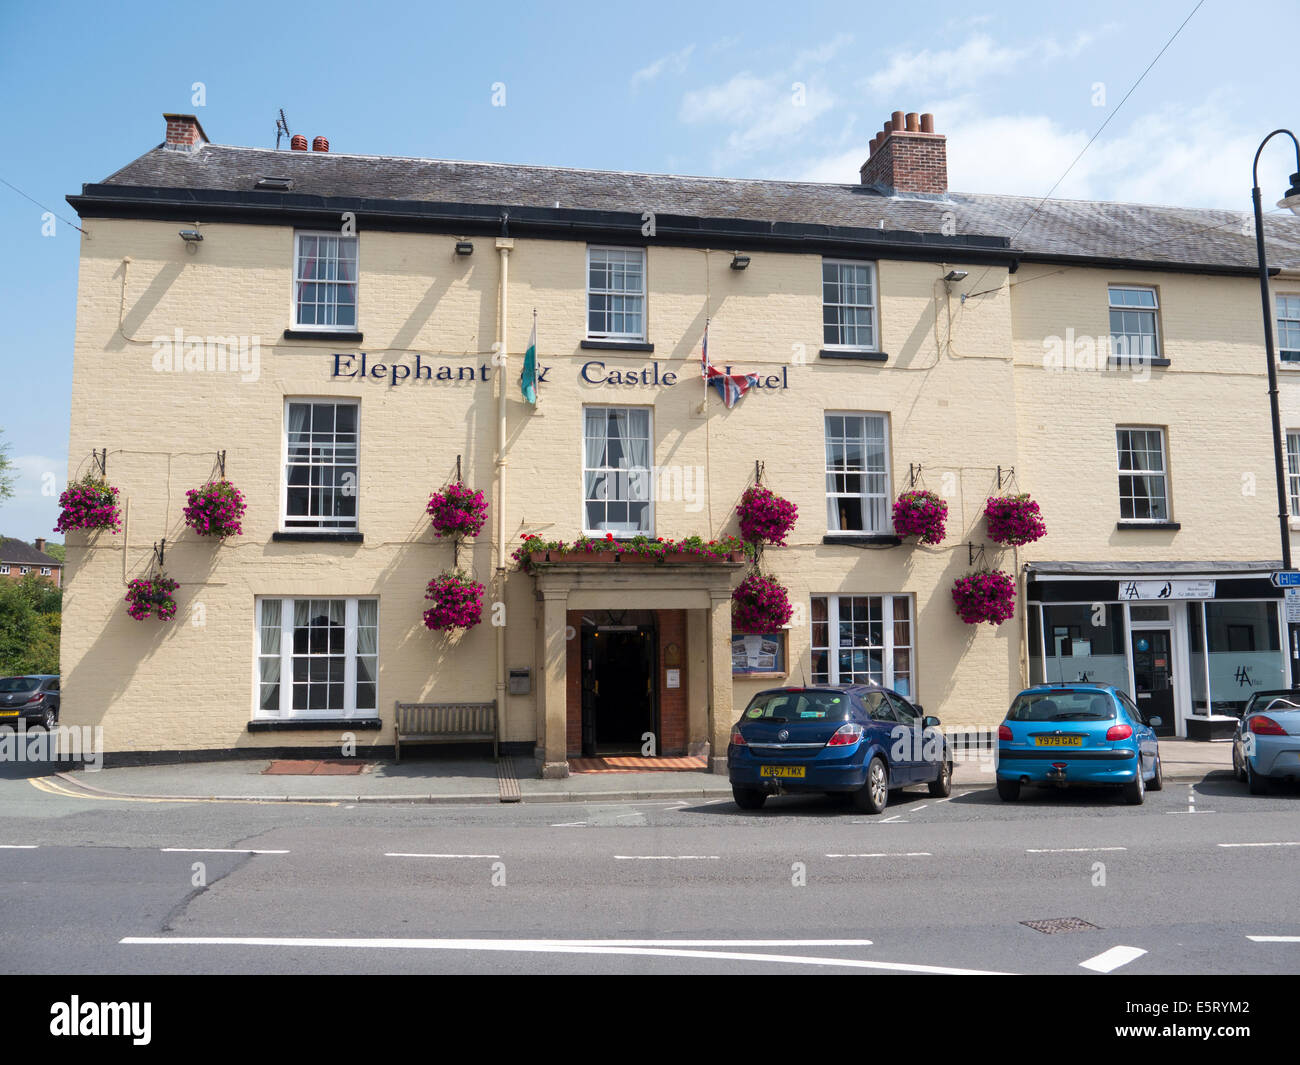 Elephant and Castle Hotel in Newtown, Powys Wales UK Stock Photo